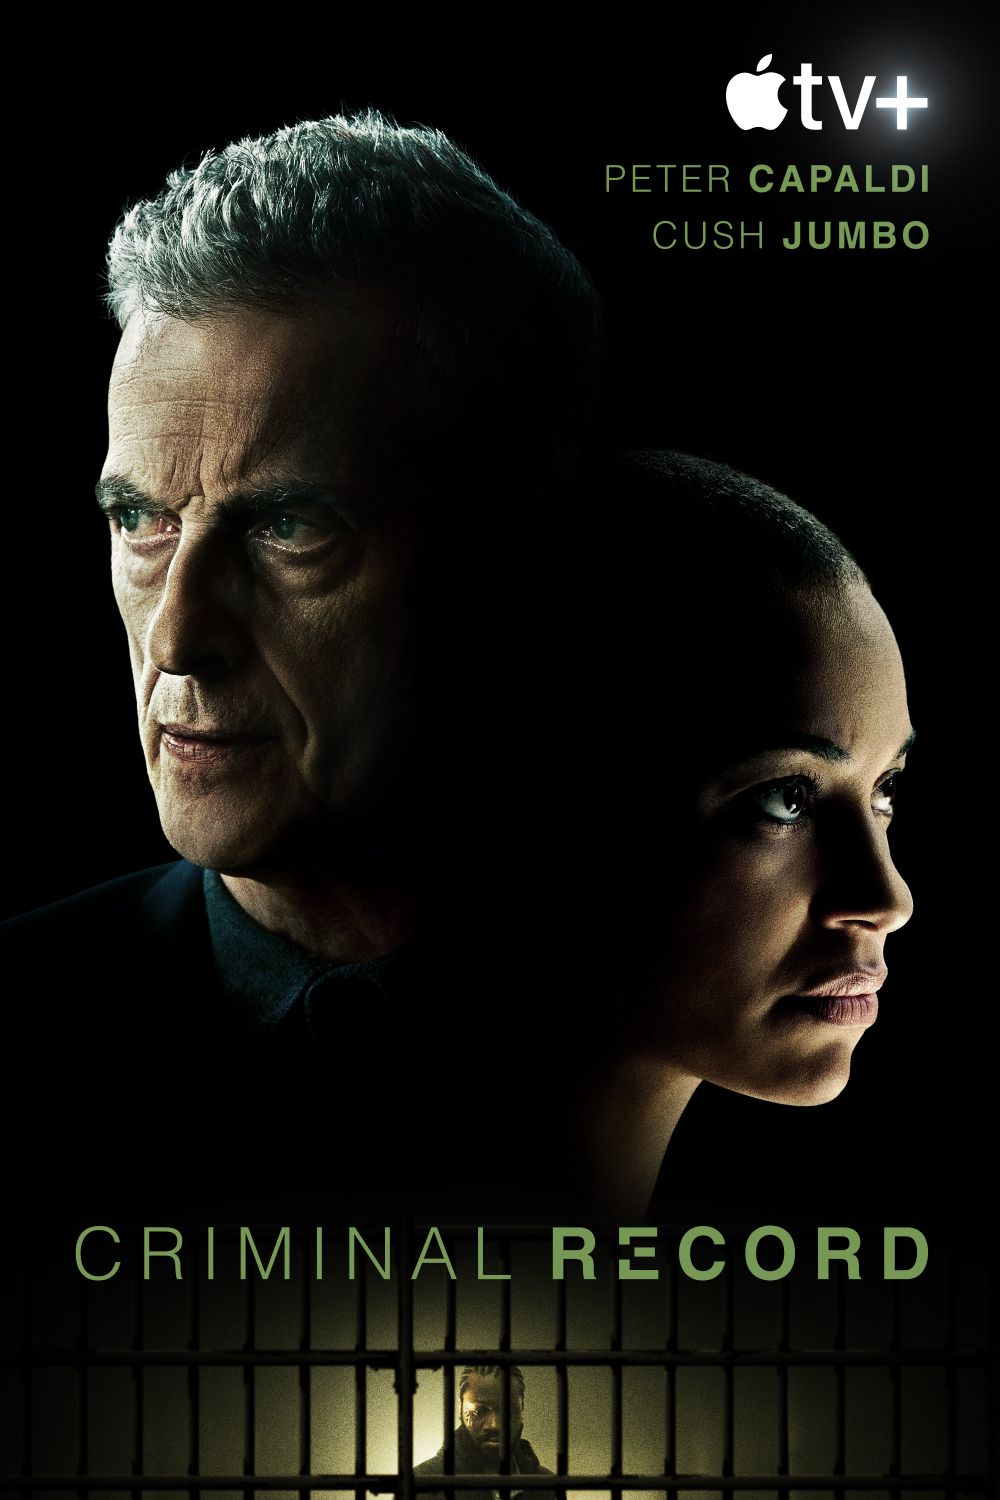 Apple TV release key art for Criminal Record - stream from January 10